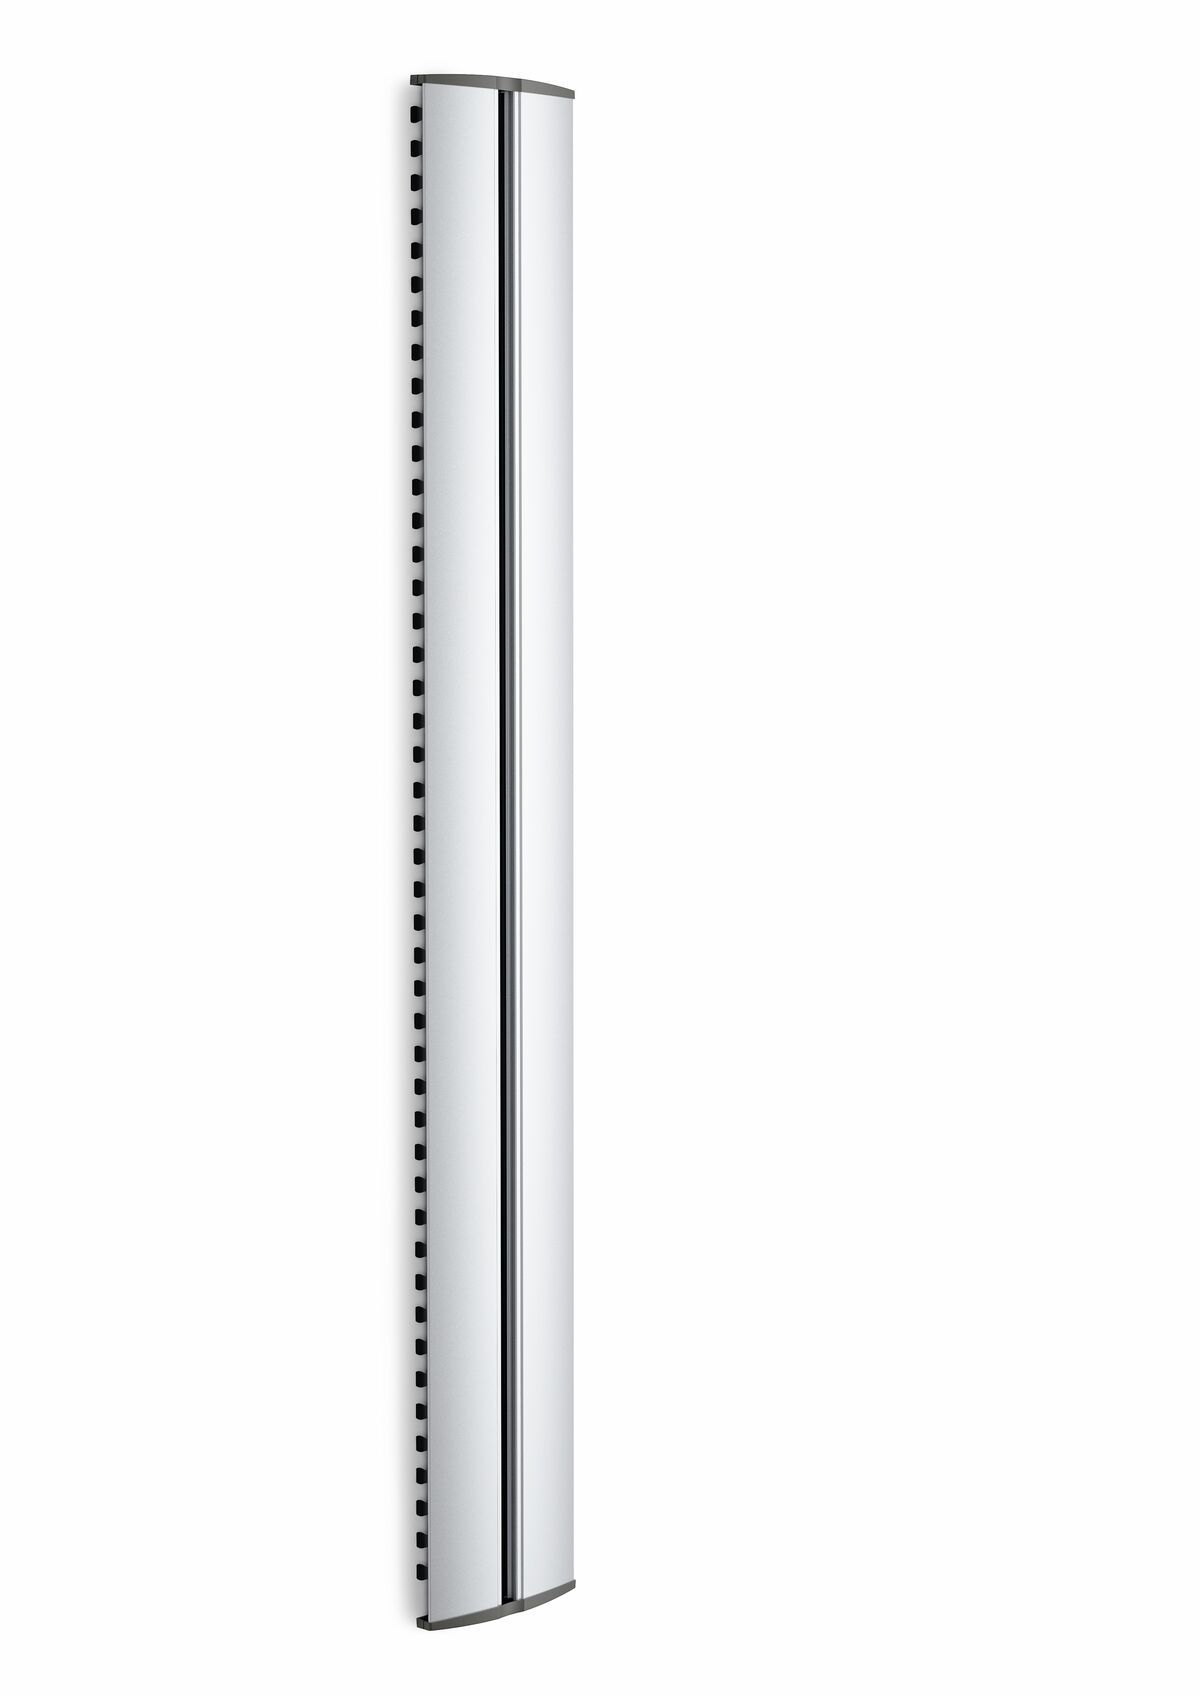 Vogel's CABLE 10 L Cable Column - Max. number of cables to hold: Up to 10 cables - Length: Product